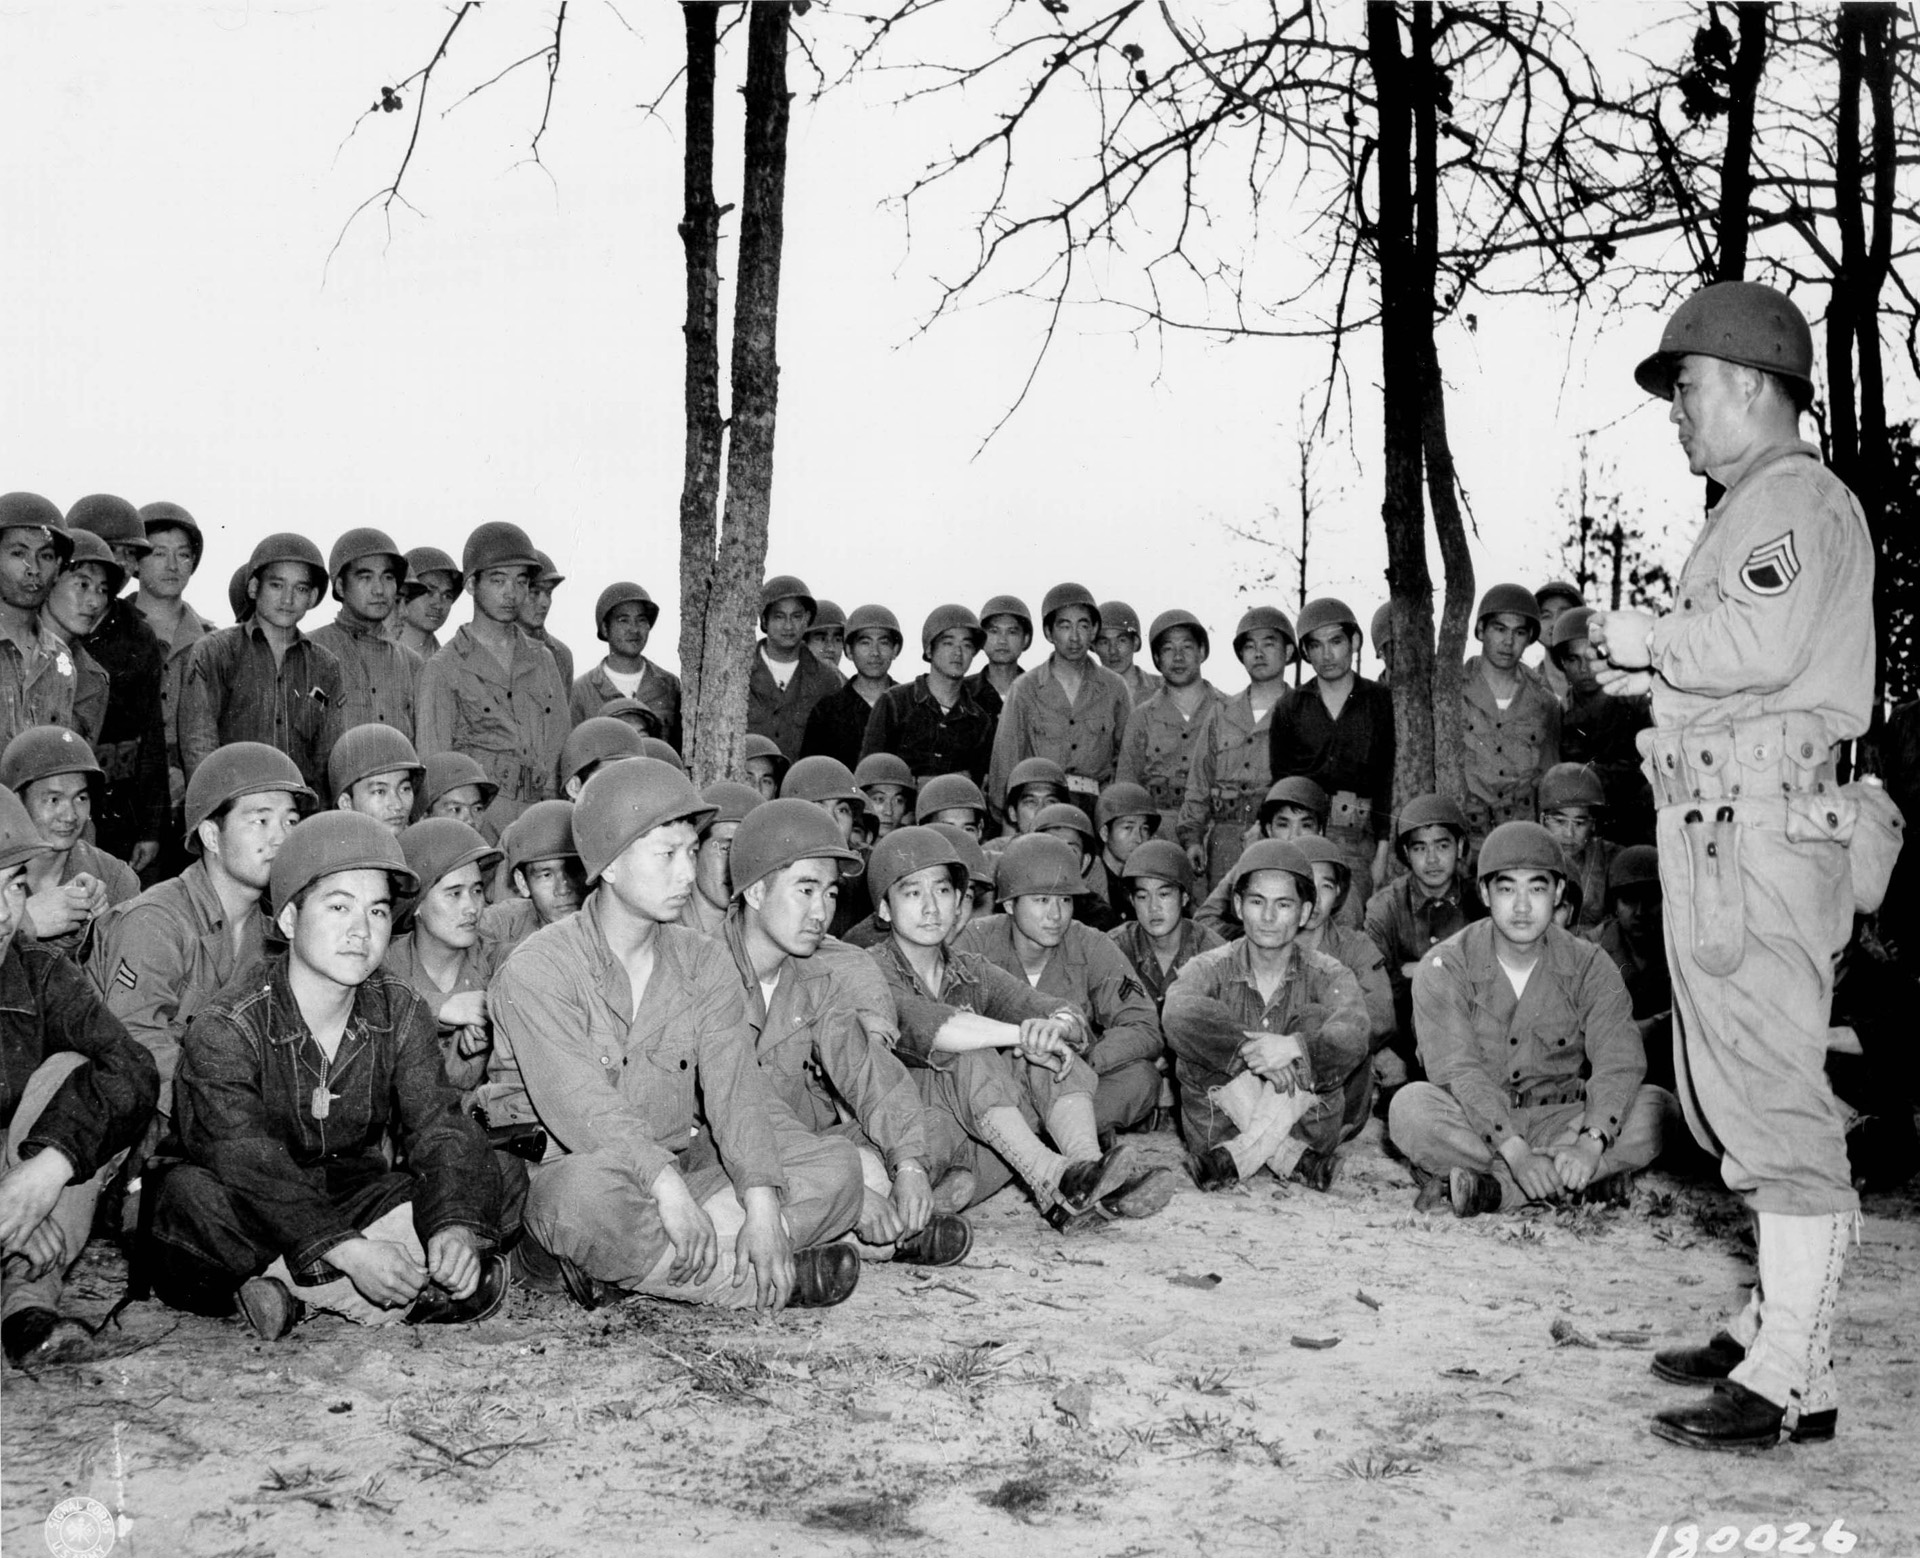 Sergeant Harry Mijamoto conducts hand-grenade training for 100th Infantry Battalion soldiers at Camp Shelby. Many of the men left the confinement of their forced-relocation centers to join the armed forces and prove their loyalty as American citizens.